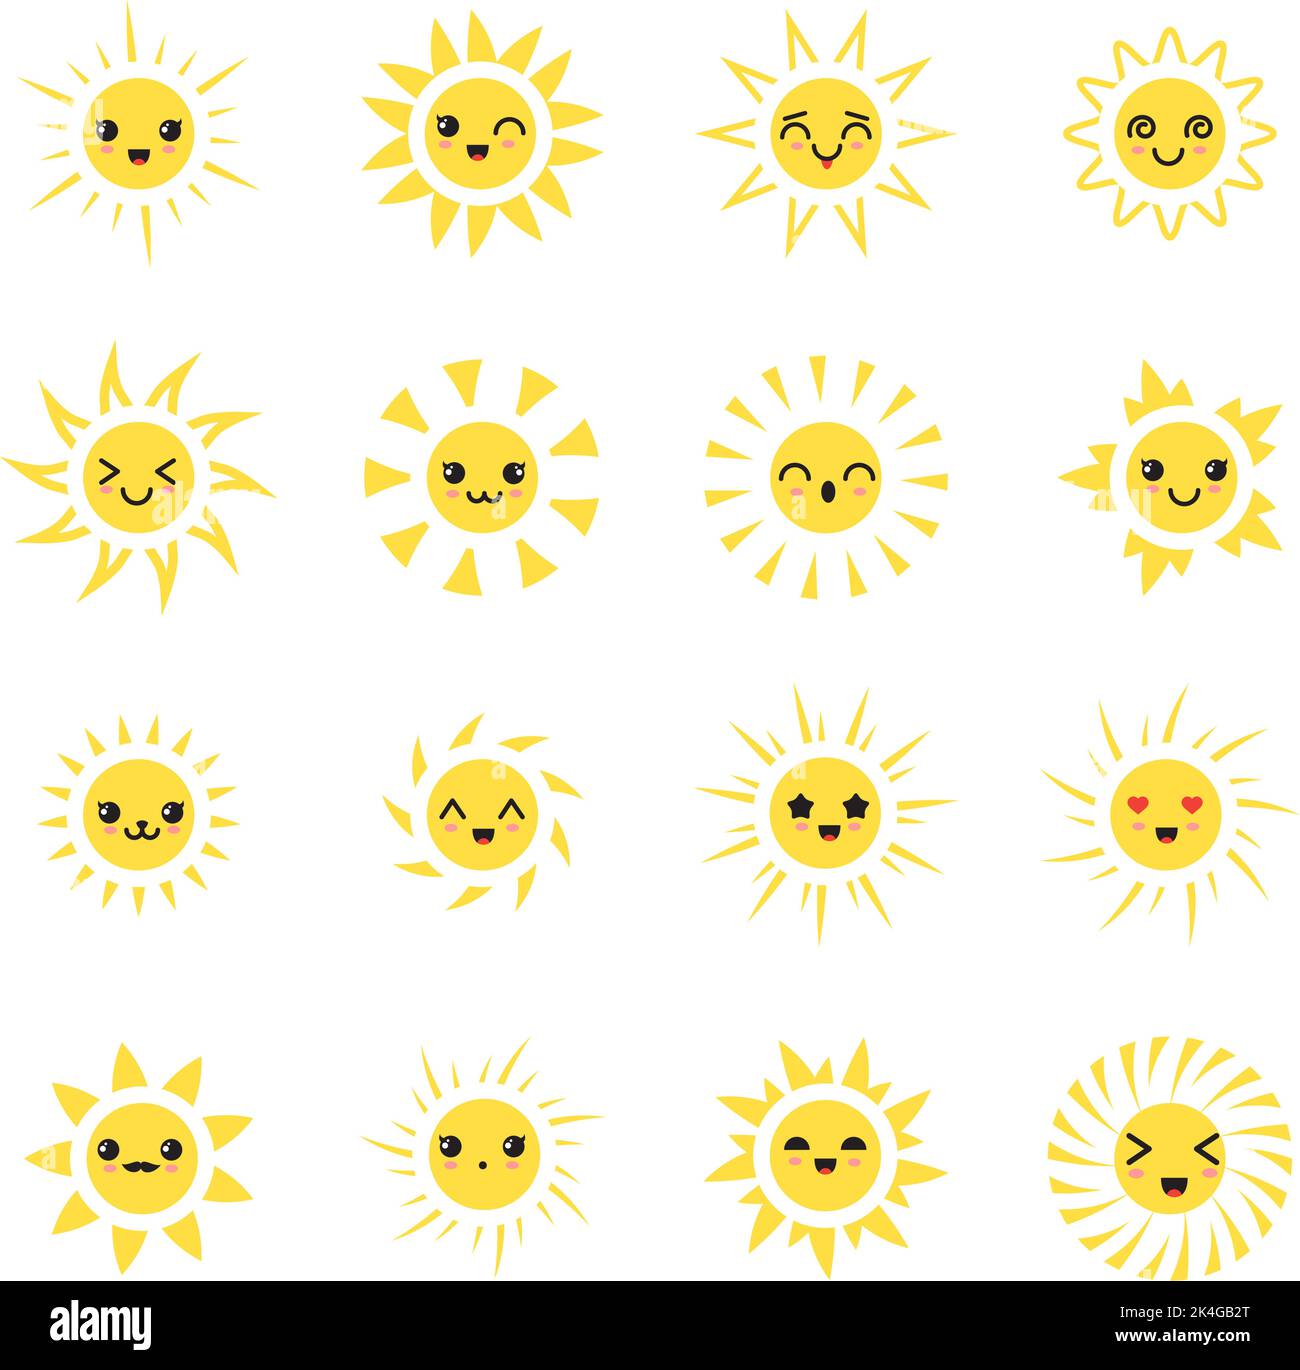 Sun characters. Cartoon suns design, emoji happy expressions, cute sunkids emotions, sunshine heads, energy faces. Illustration of character sun emoji Stock Vector